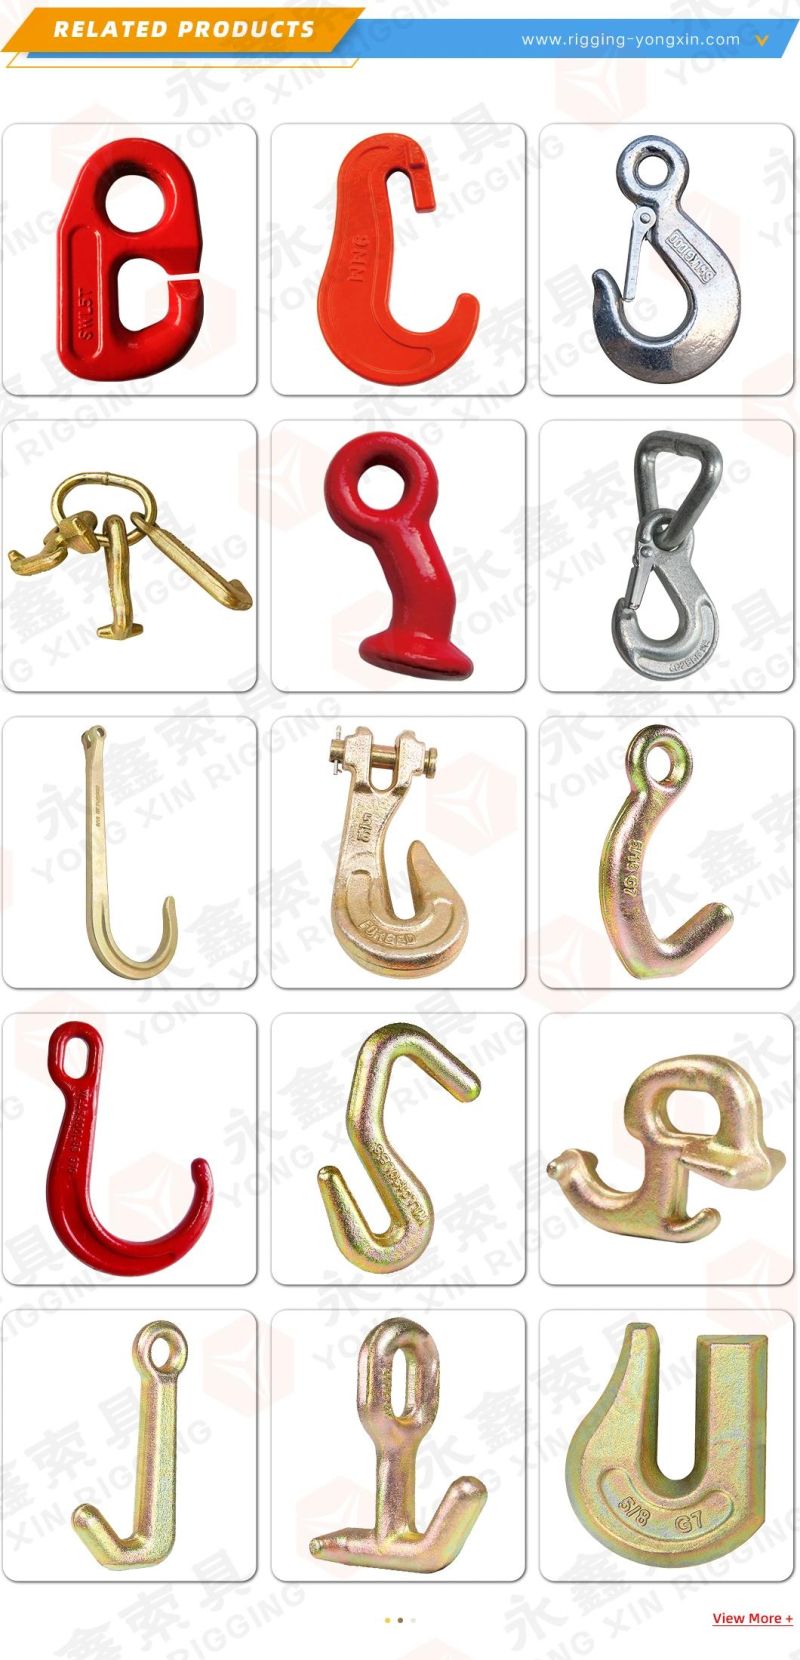 Factory Standard 5/16" Grade 70 G70 Forged 4700 Lbs 15inch Towing J-Hooks, 4inch J and T-Hook Towing Chain Bridle Rtj Clusters